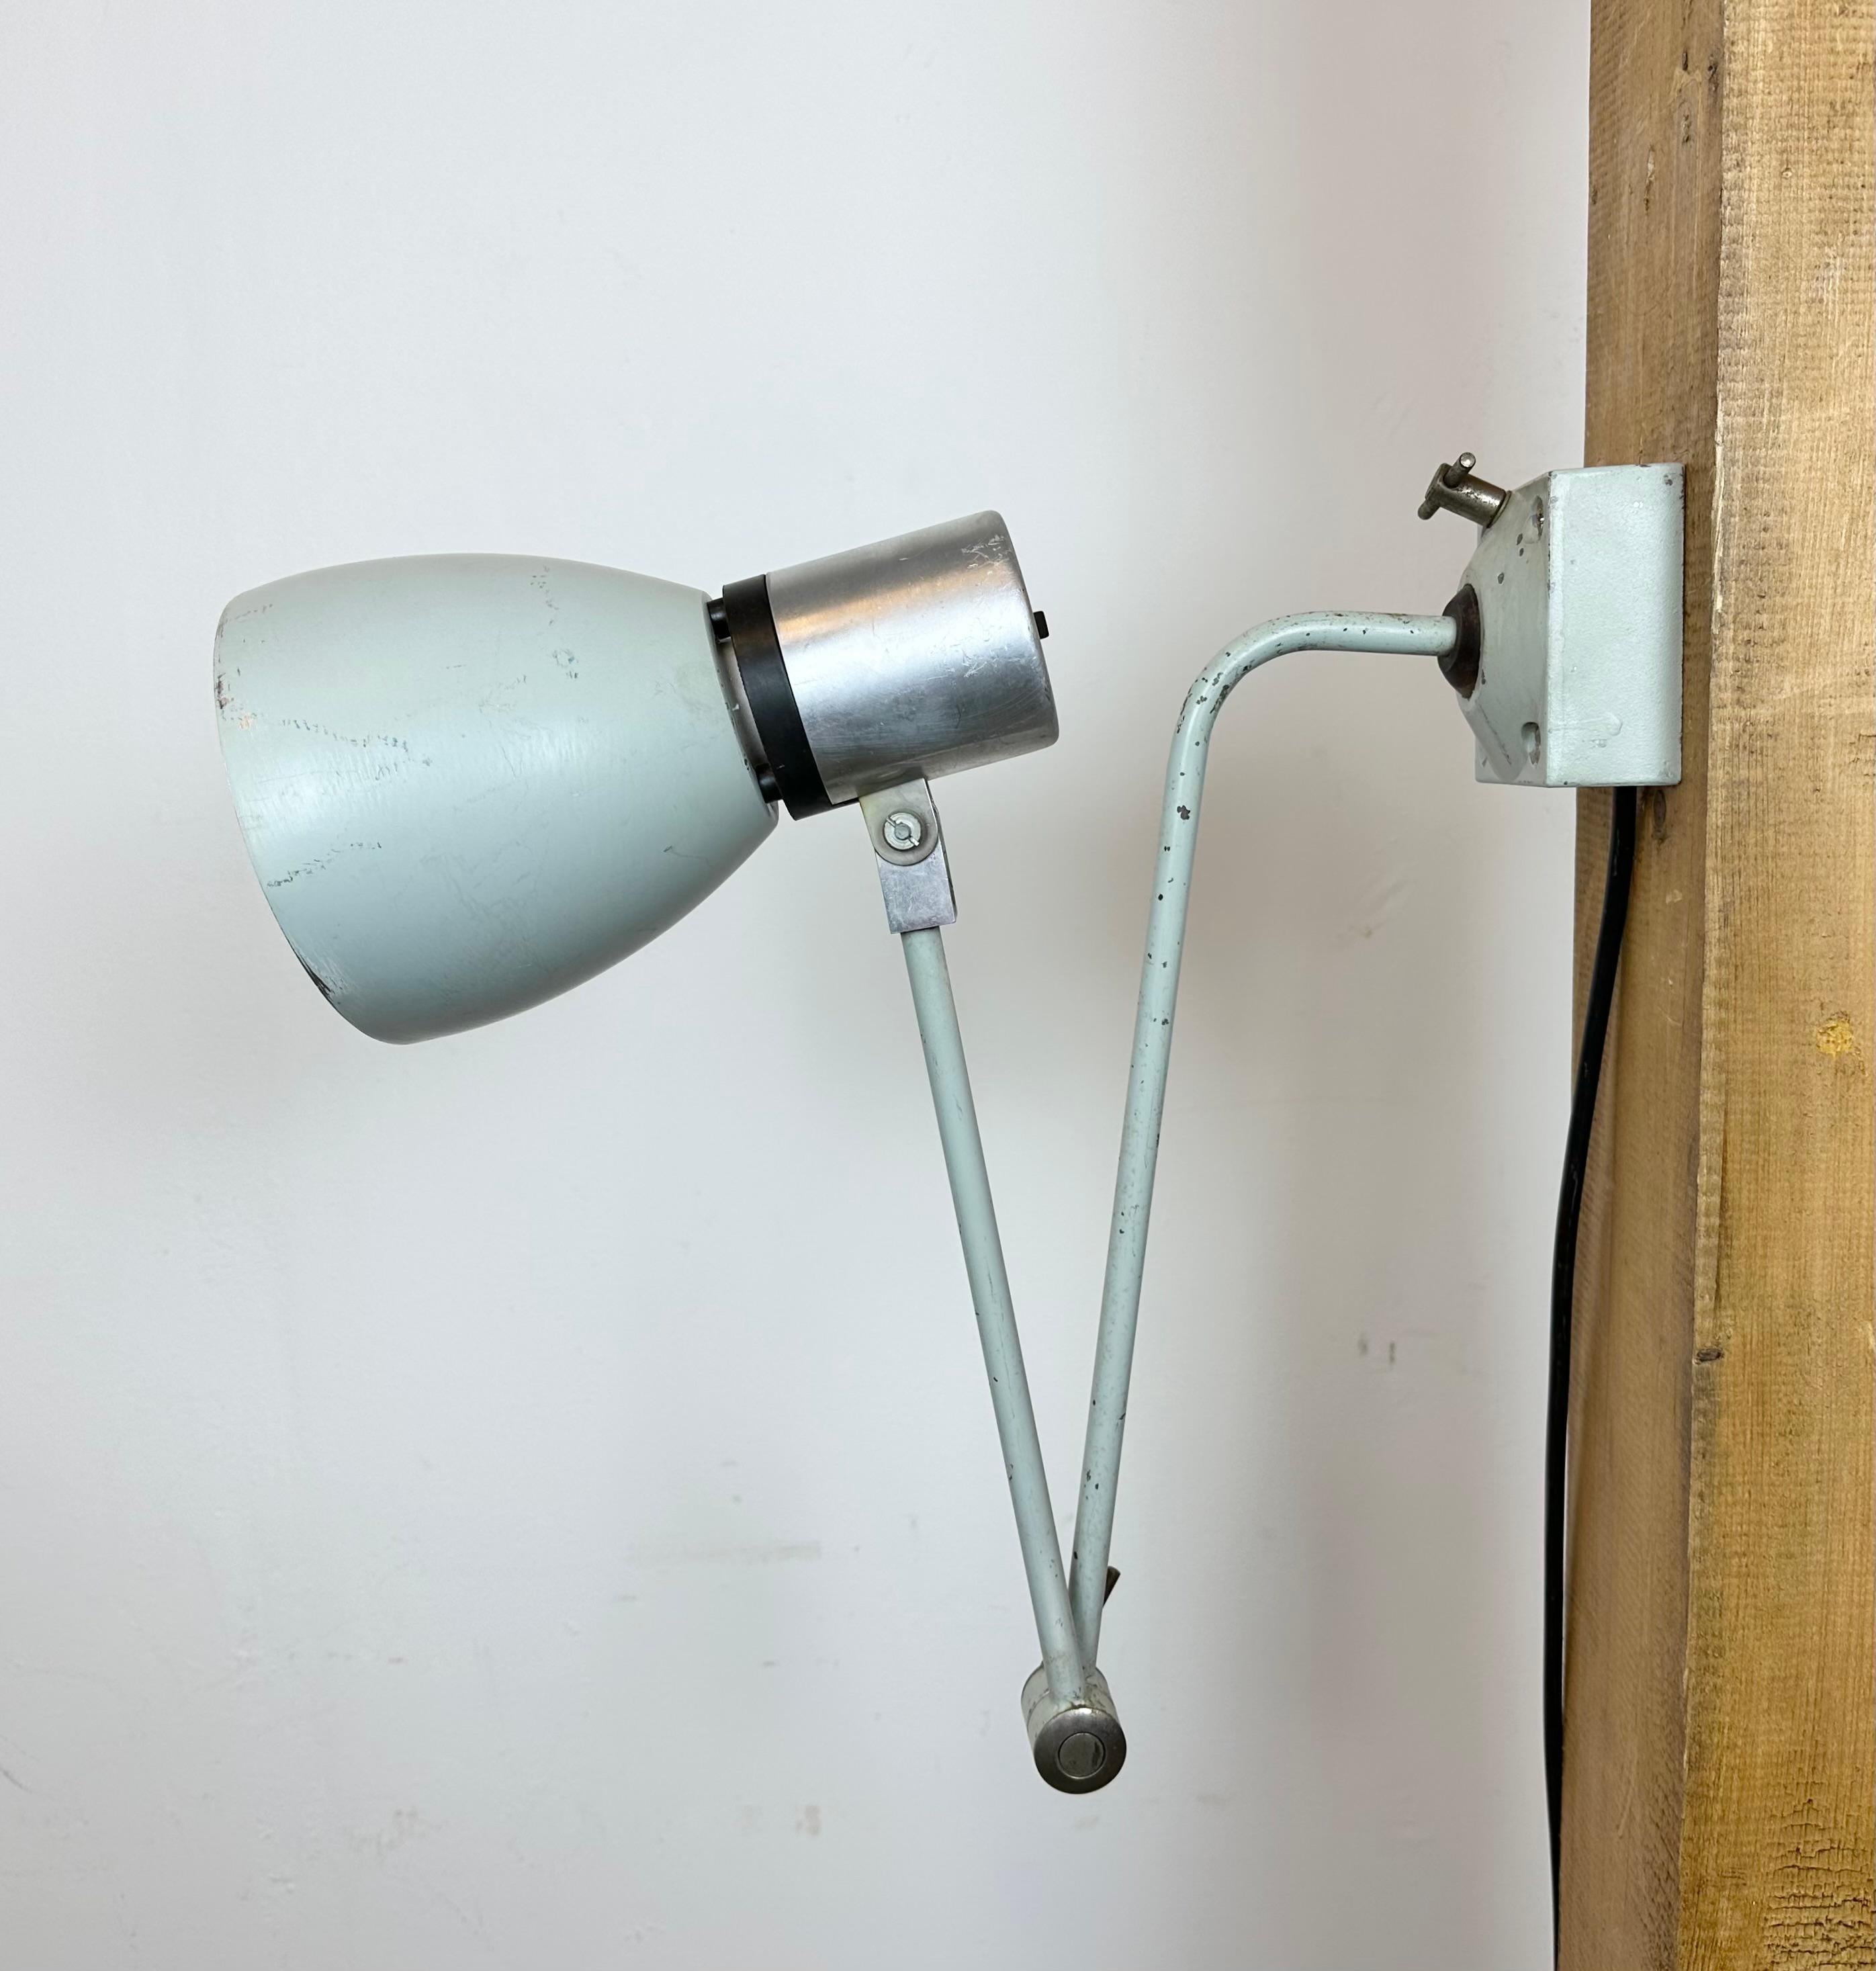 Industrial wall light made by Elektrosvit in former Czechoslovakia during the 1970s. It features an iron base, an iron arm with two  adjustable joints and aluminium shade with original switch on the top. The socket requires standard E 27 / E26